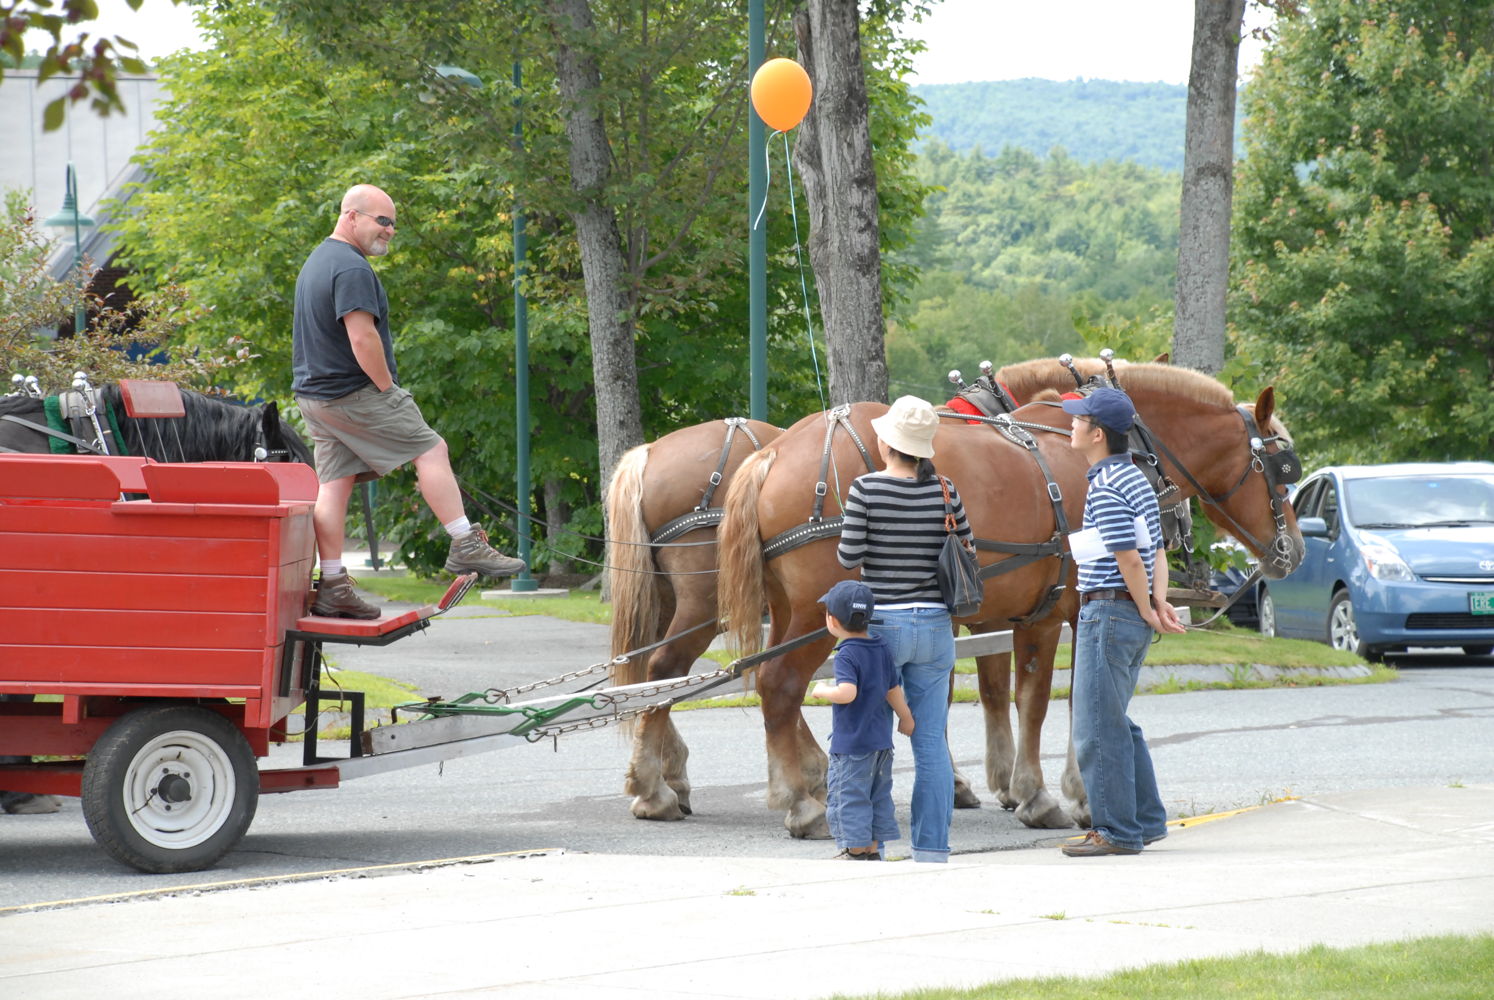 Wagon rides, another tradition of the Producers Fair.